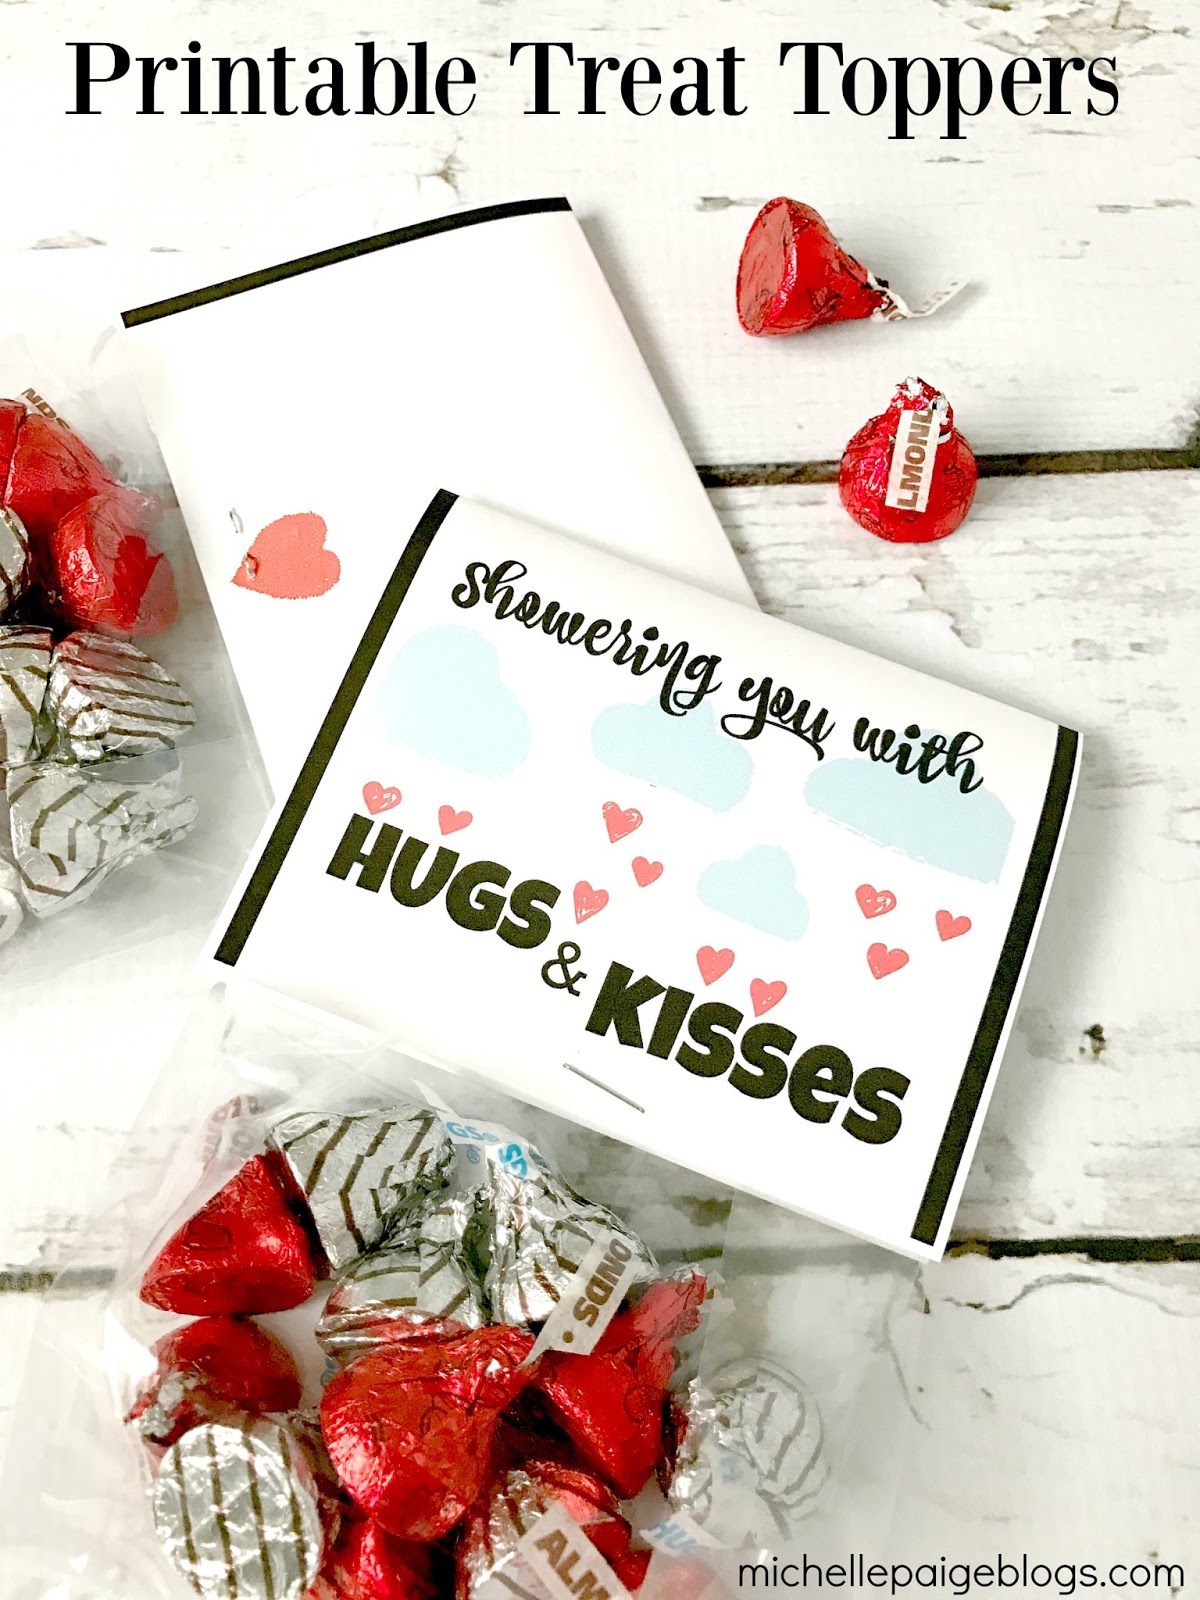 michelle paige blogs Showering You with Kisses Valentine Printable